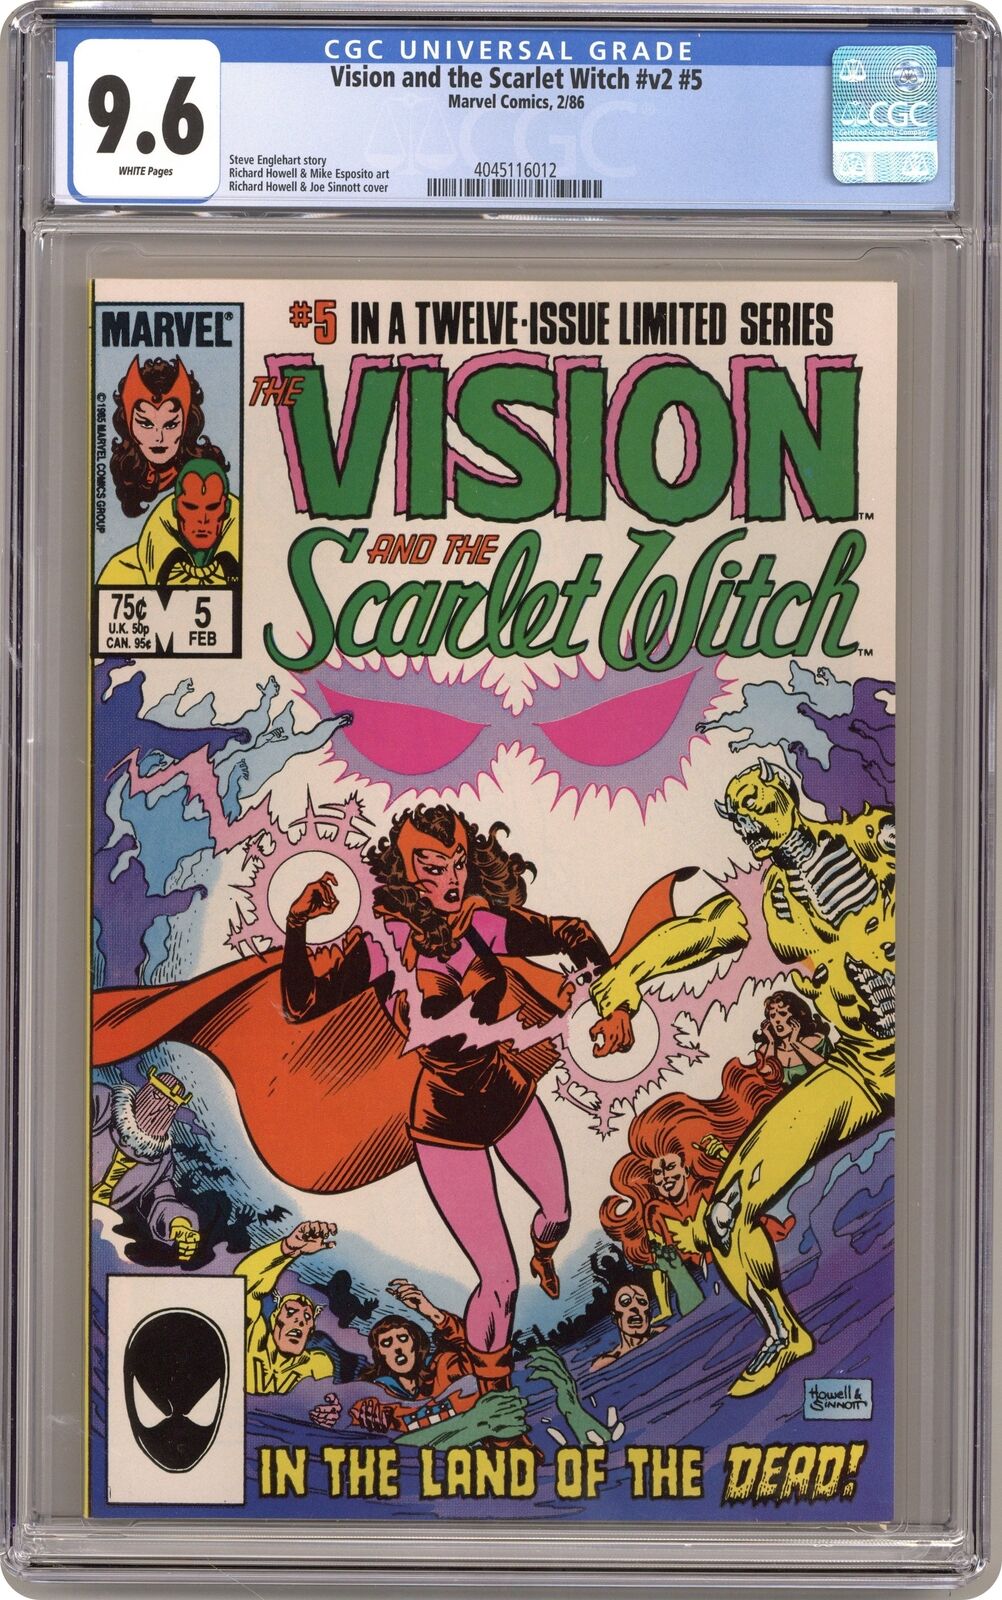 Vision and the Scarlet Witch #5 CGC 9.6 1986 4045116012